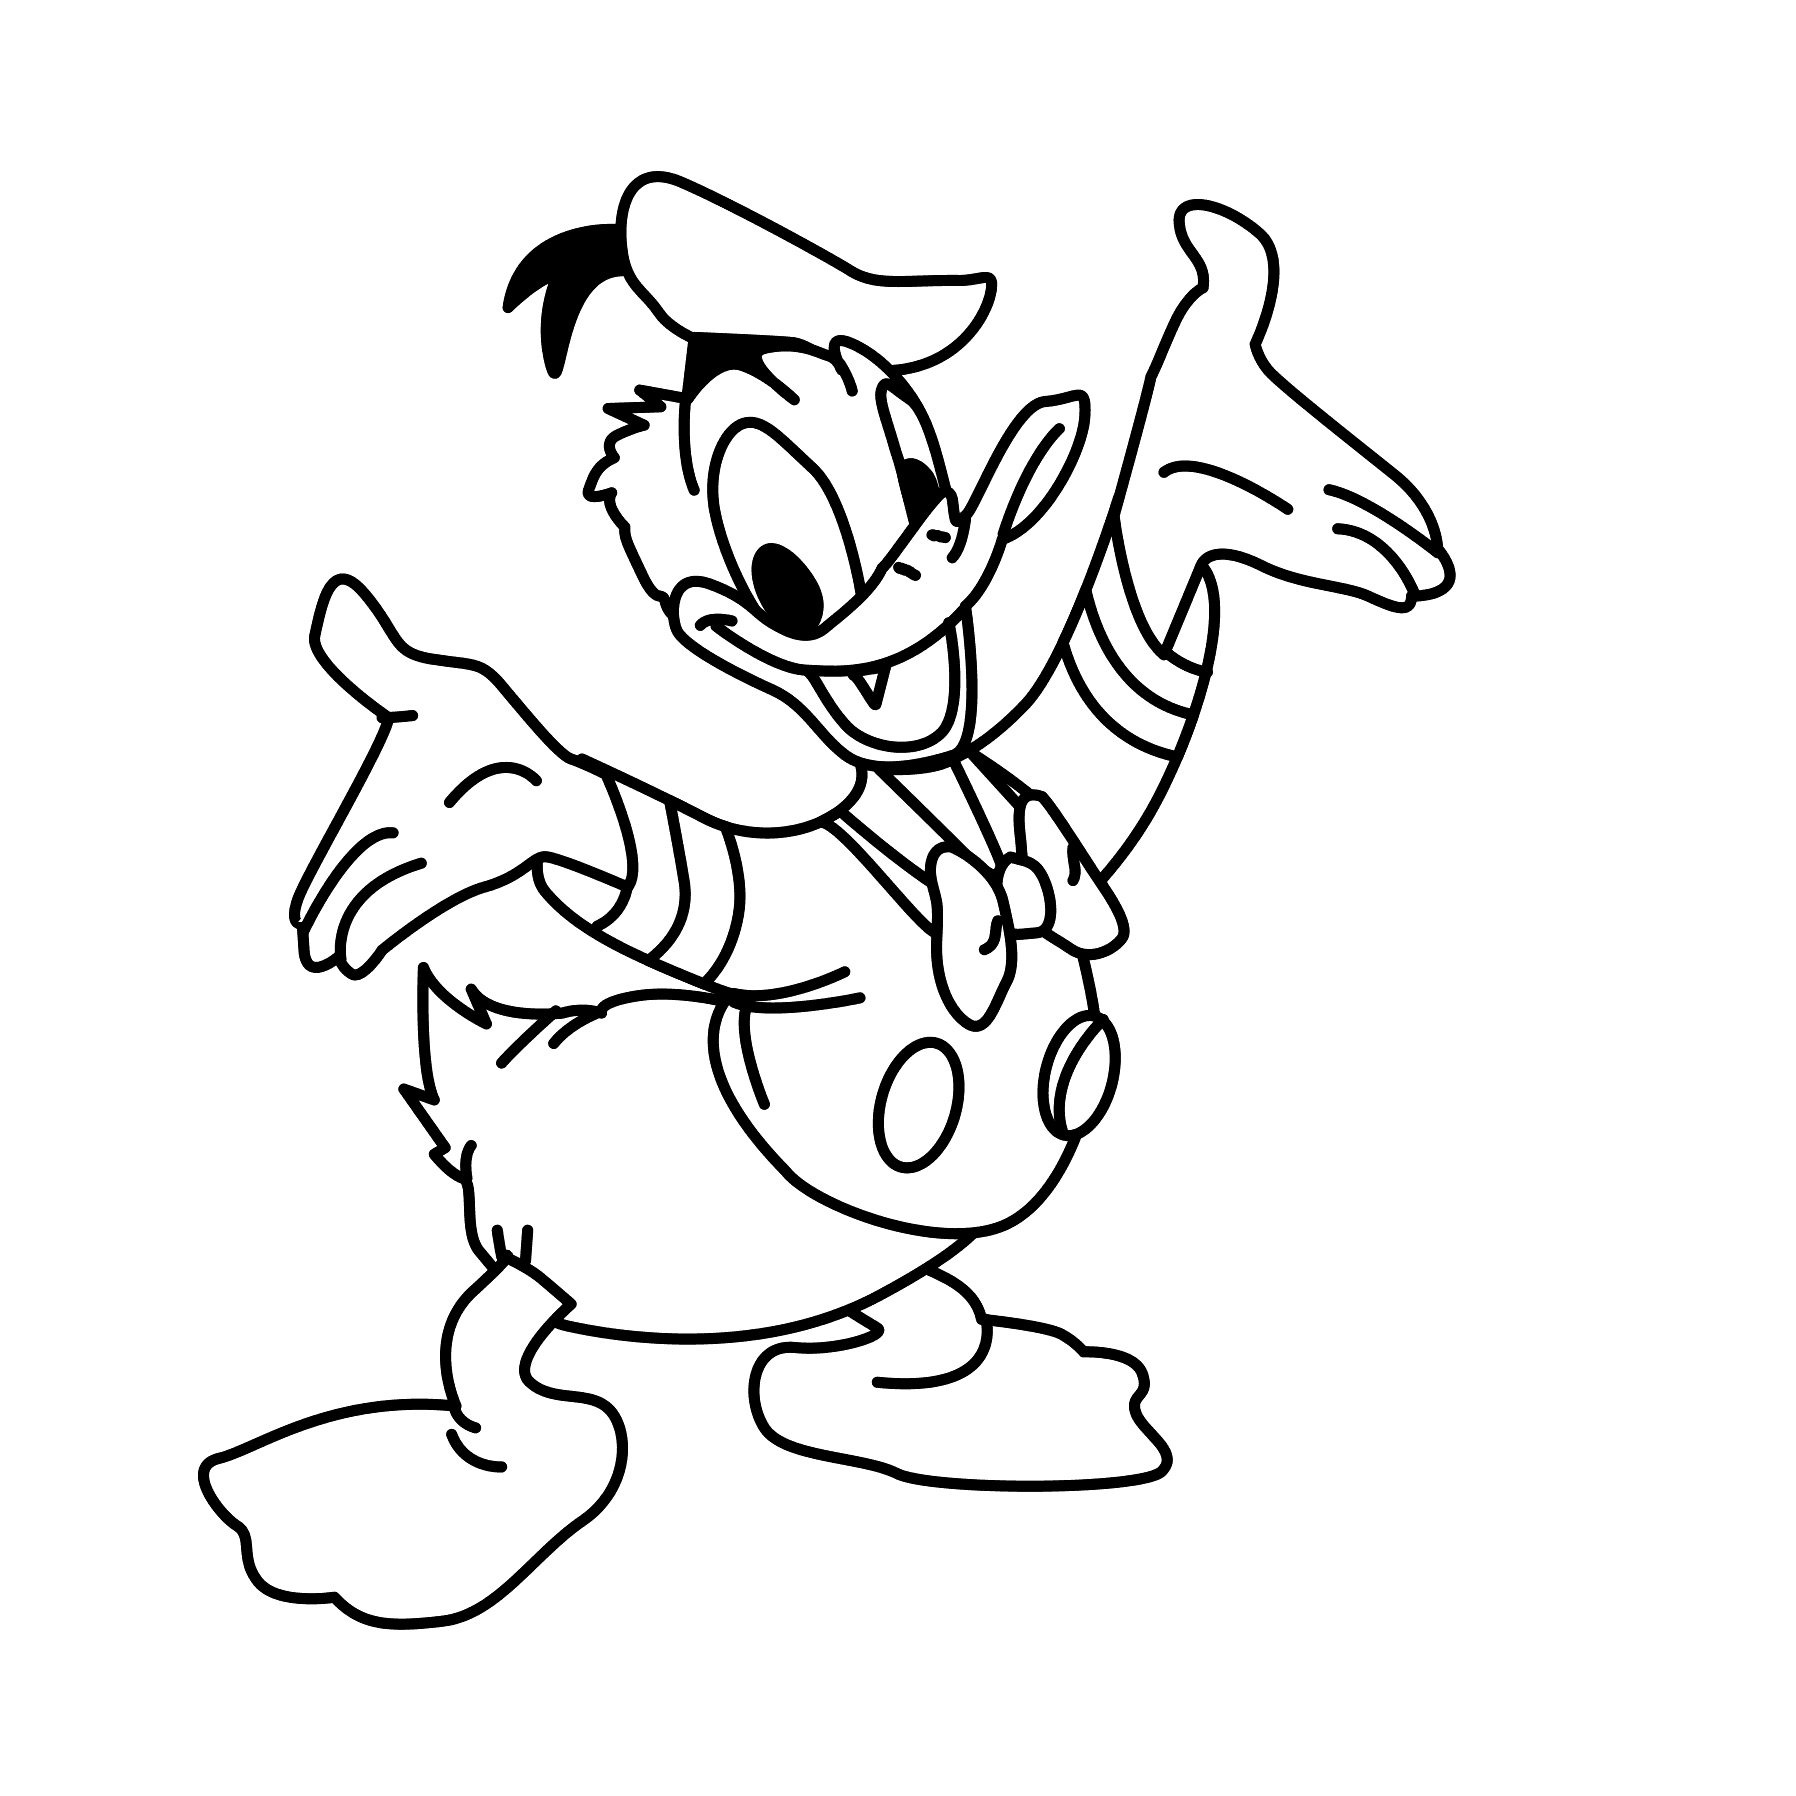 Donald To Download For Free Donald Kids Coloring Pages